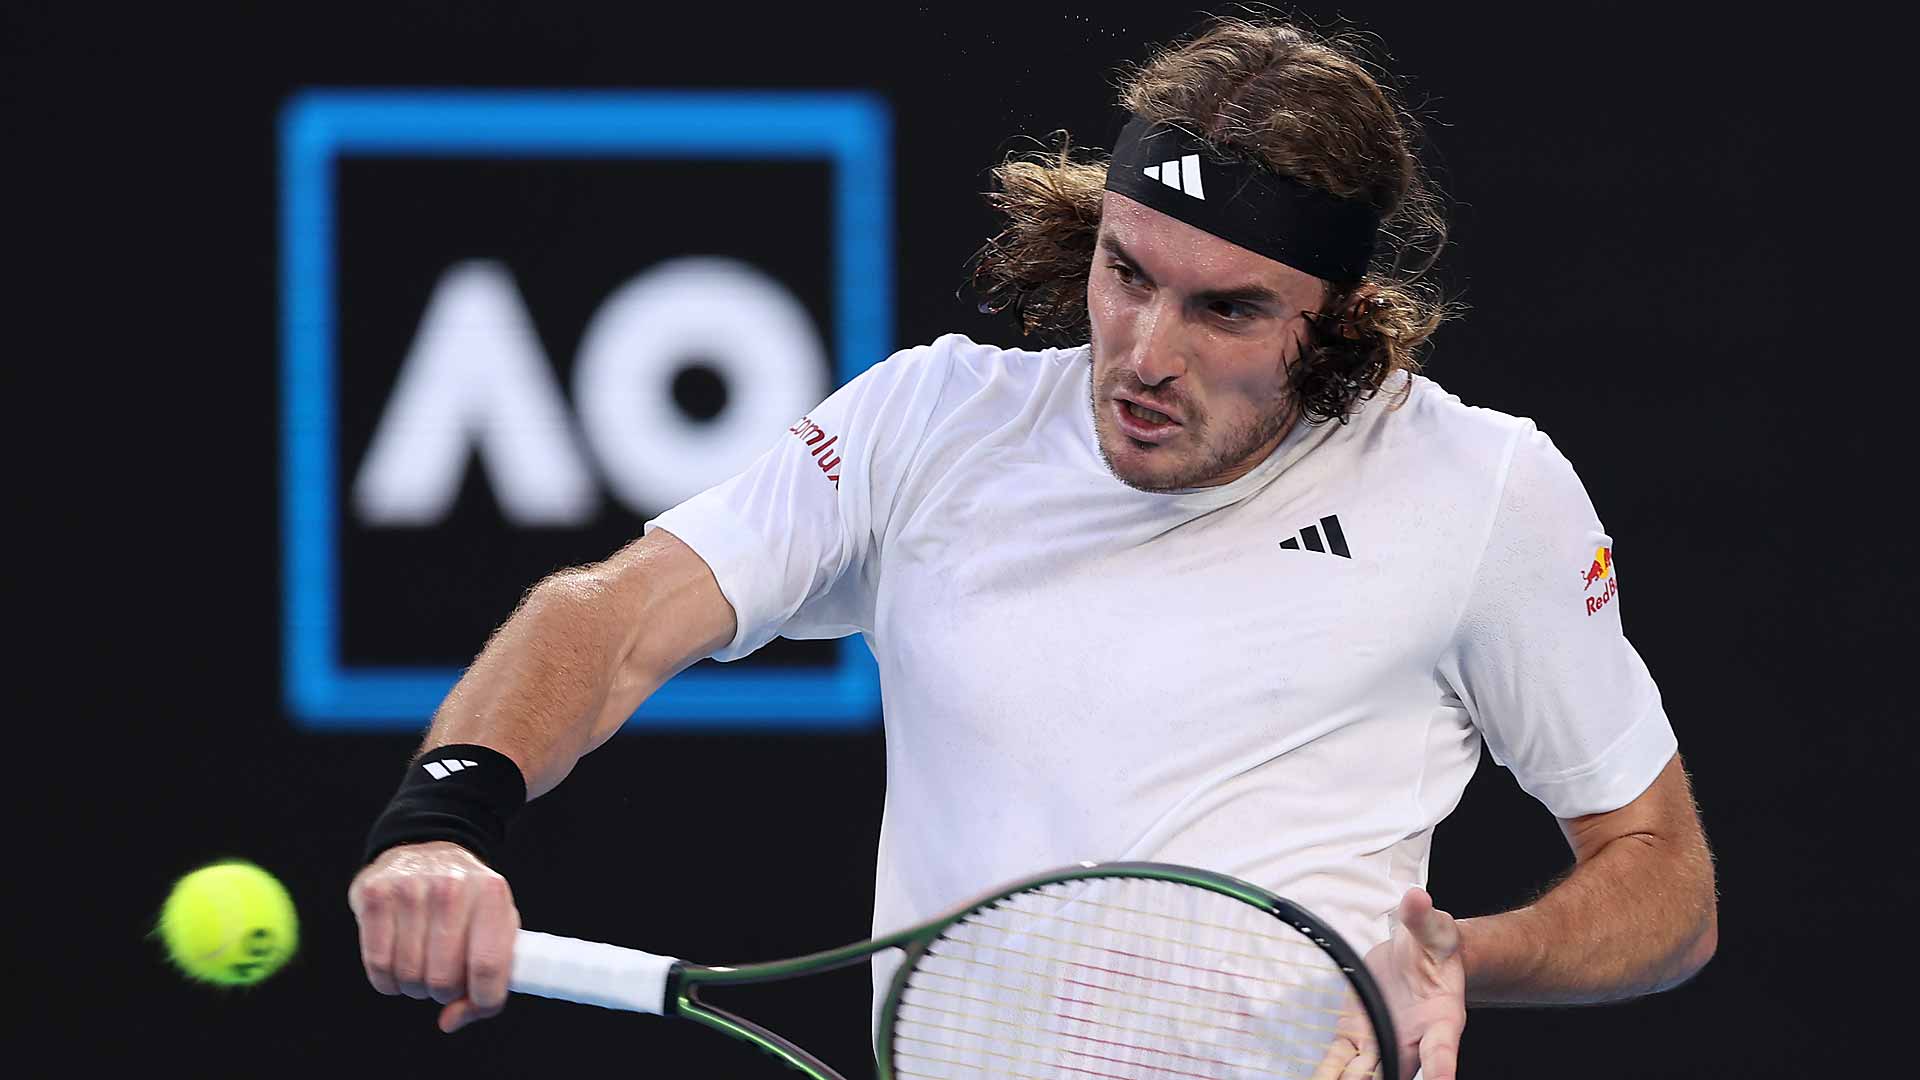 Australian Open Results: Stefanos Tsitsipas shows fighting spirit at Australian Open to down Quentin Halys in 1st round, Watch Highlights